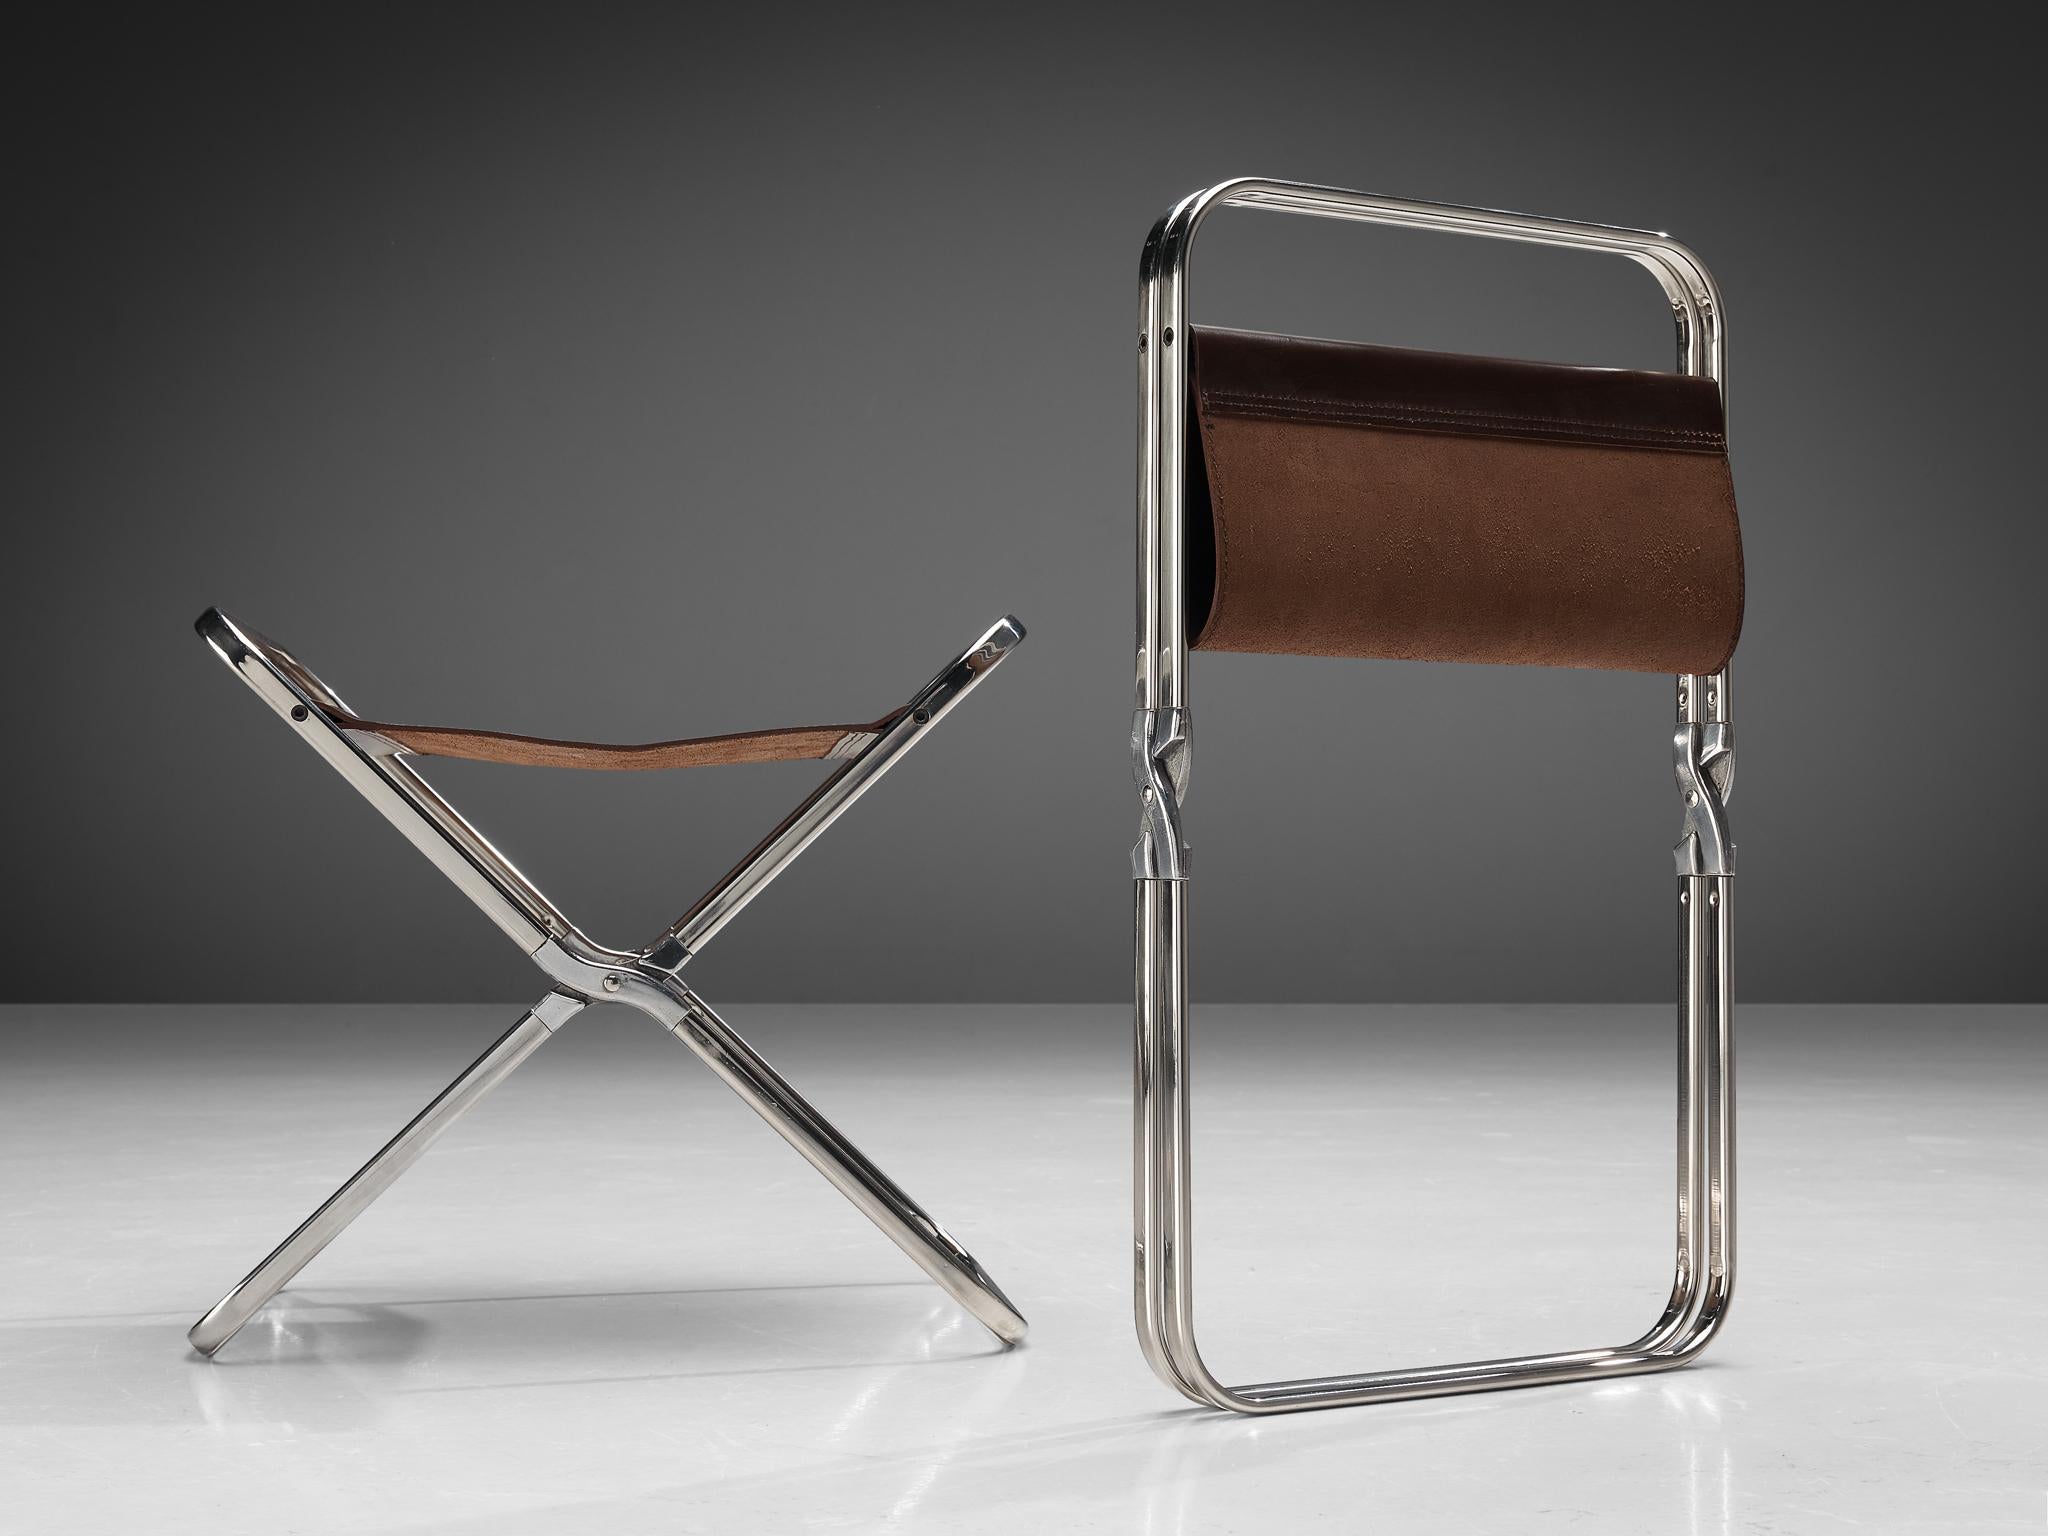 Gae Aulenti for Zanotta, folding stools, stainless steel, aluminum, saddle leather, Italy, 1964

Innovative and multifunctional pair of folding stools, model 'April', designed by Gae Aulenti. The foldable stool is made of stainless steel with a